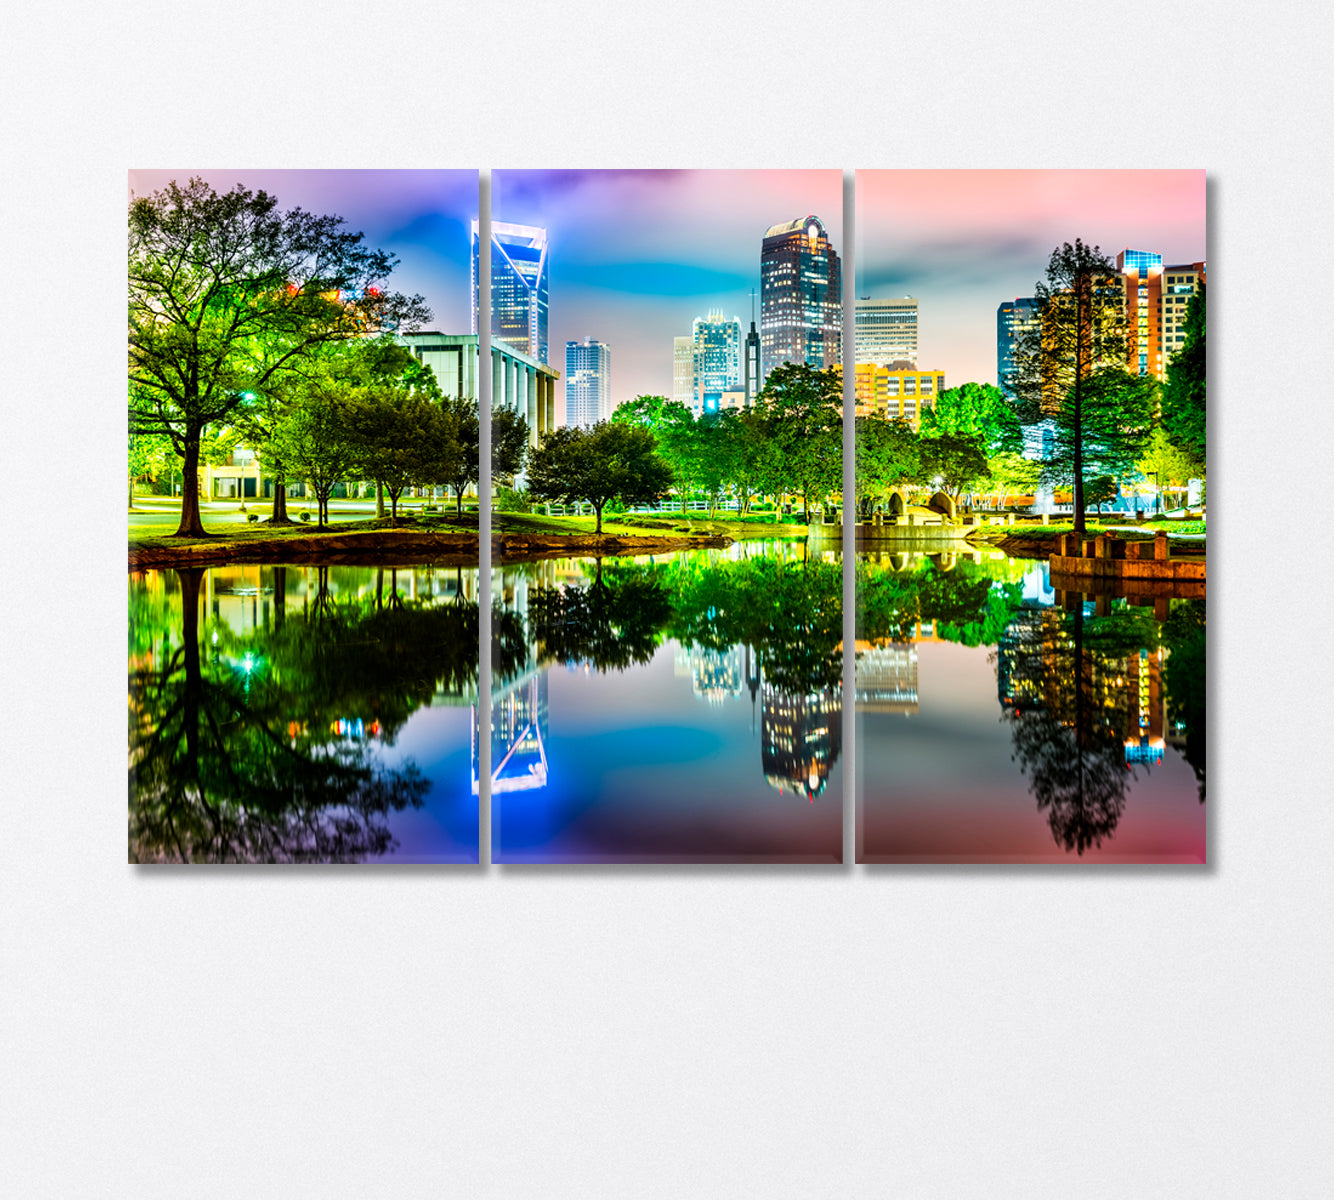 Reflection of Charlotte Lights in Marshall Park Pond Canvas Print-Canvas Print-CetArt-3 Panels-36x24 inches-CetArt